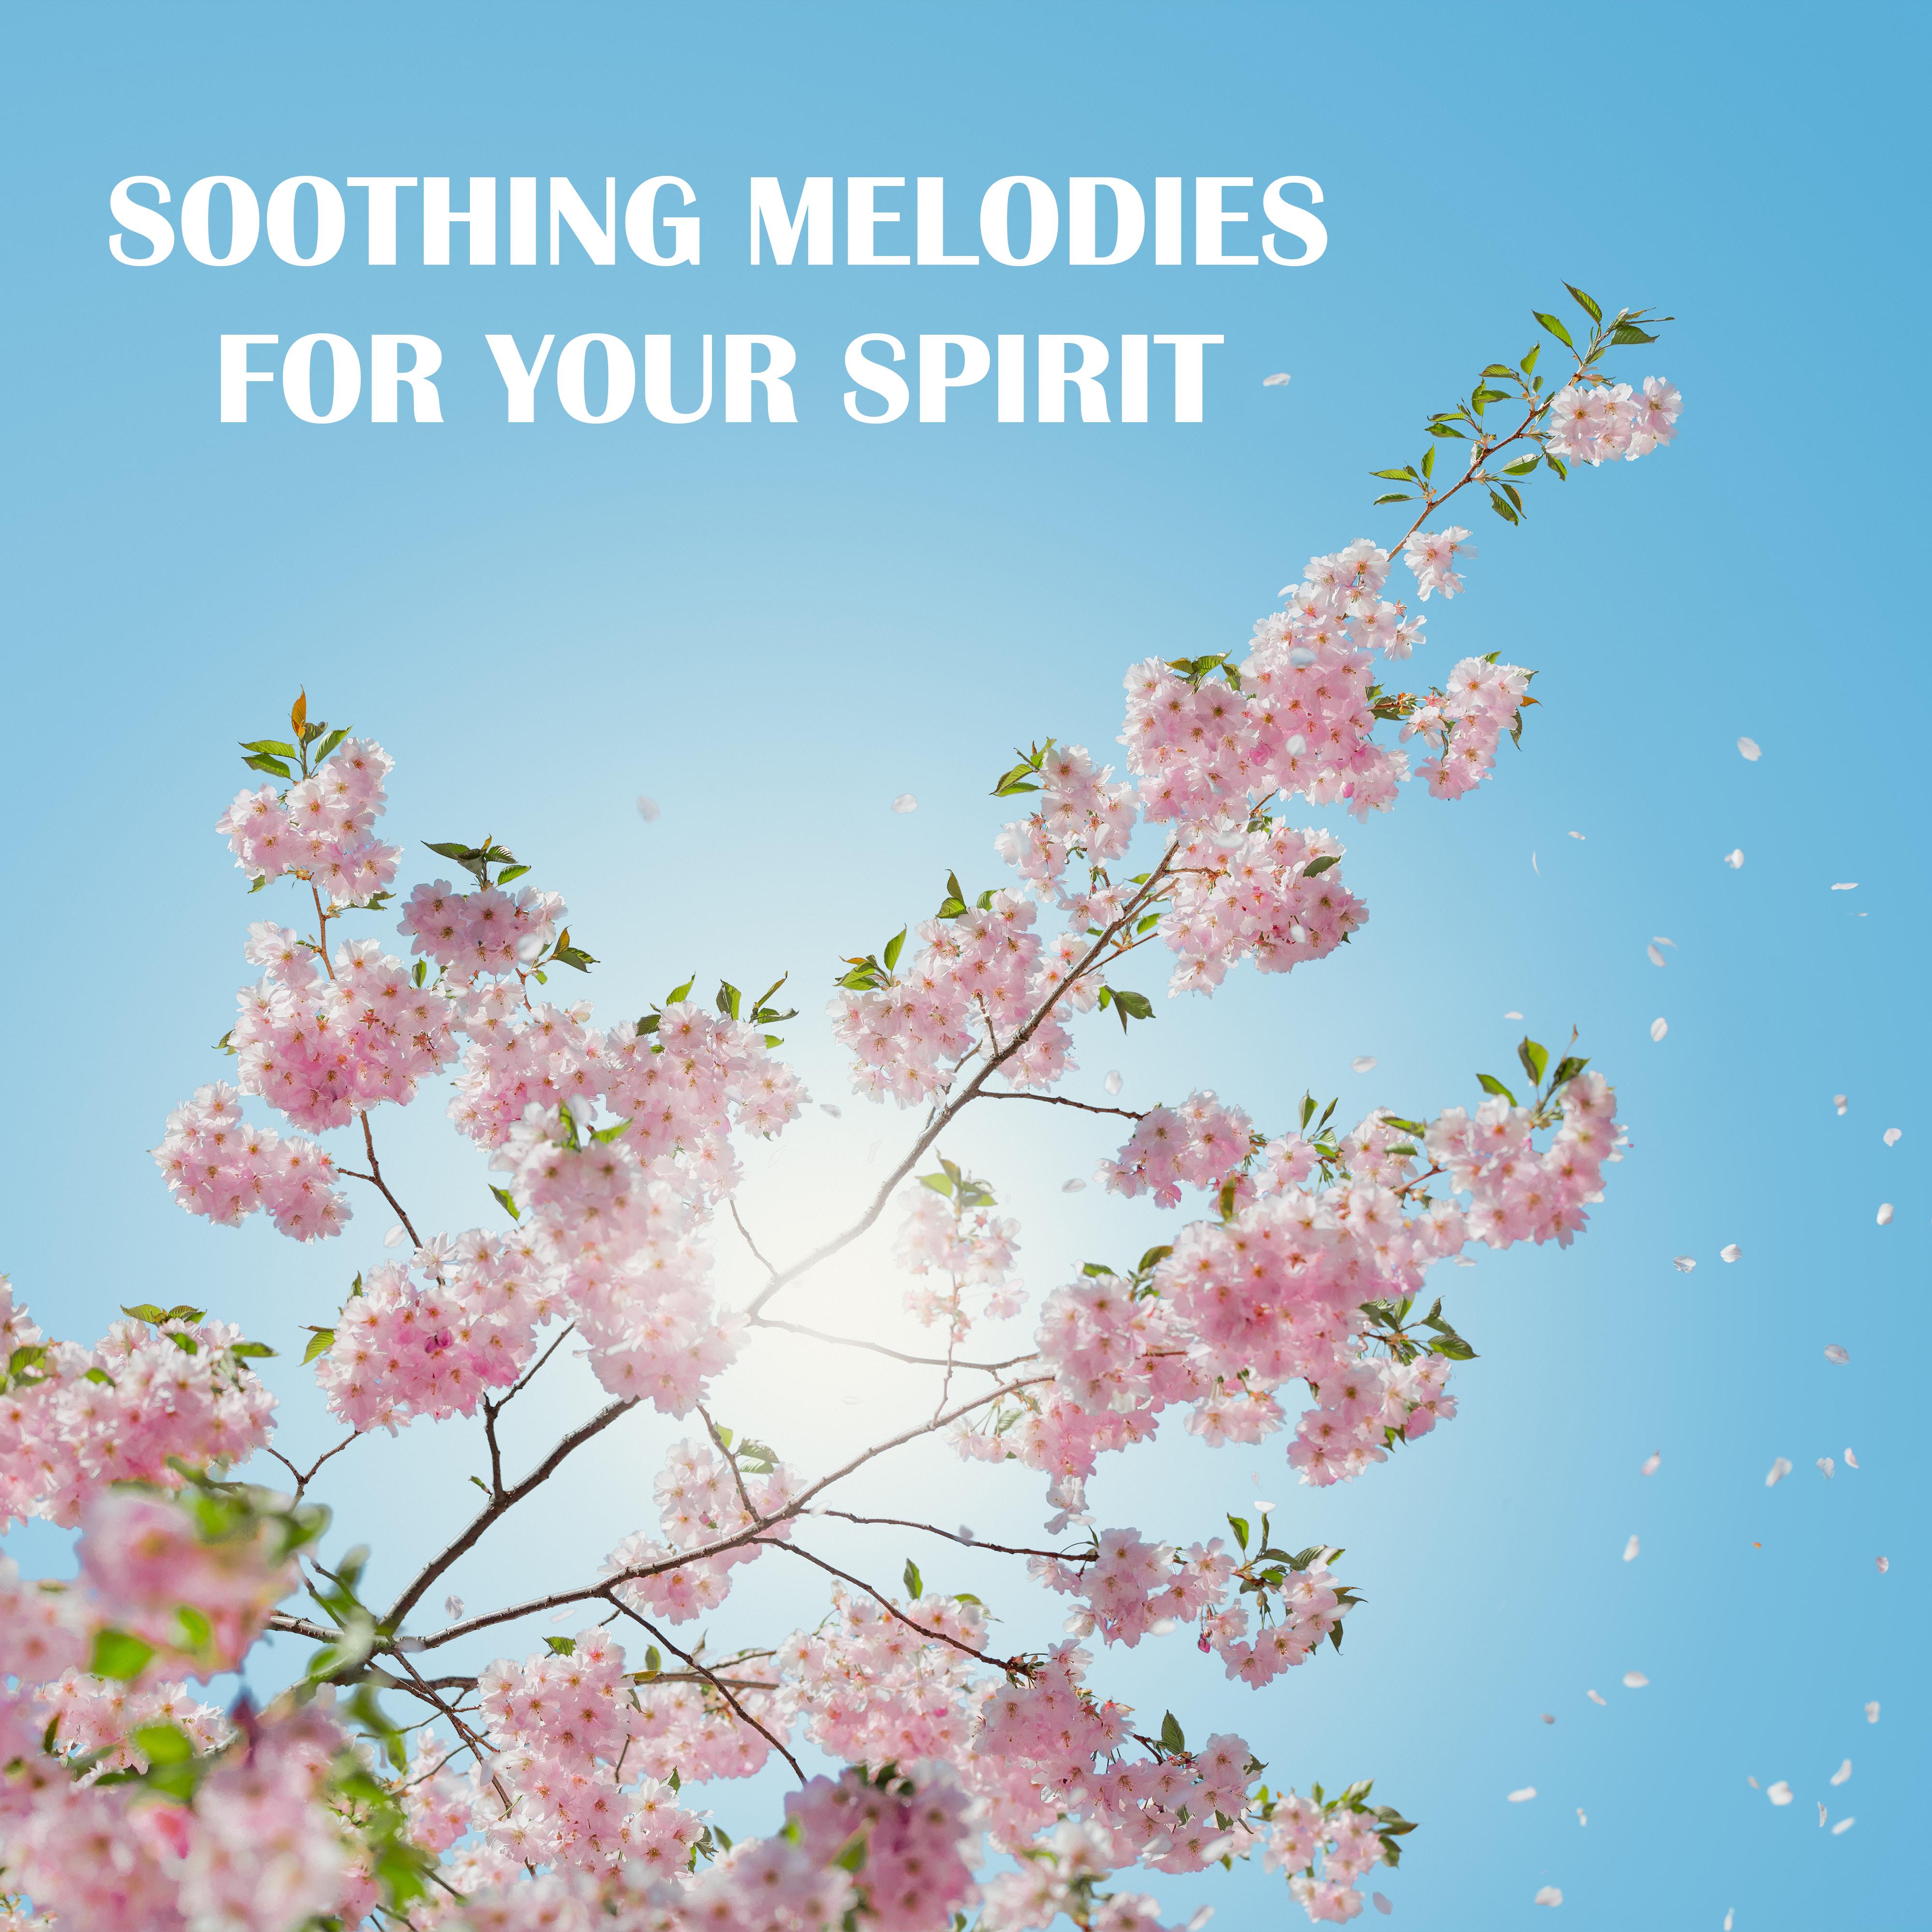 Soothing Melodies for Your Spirit